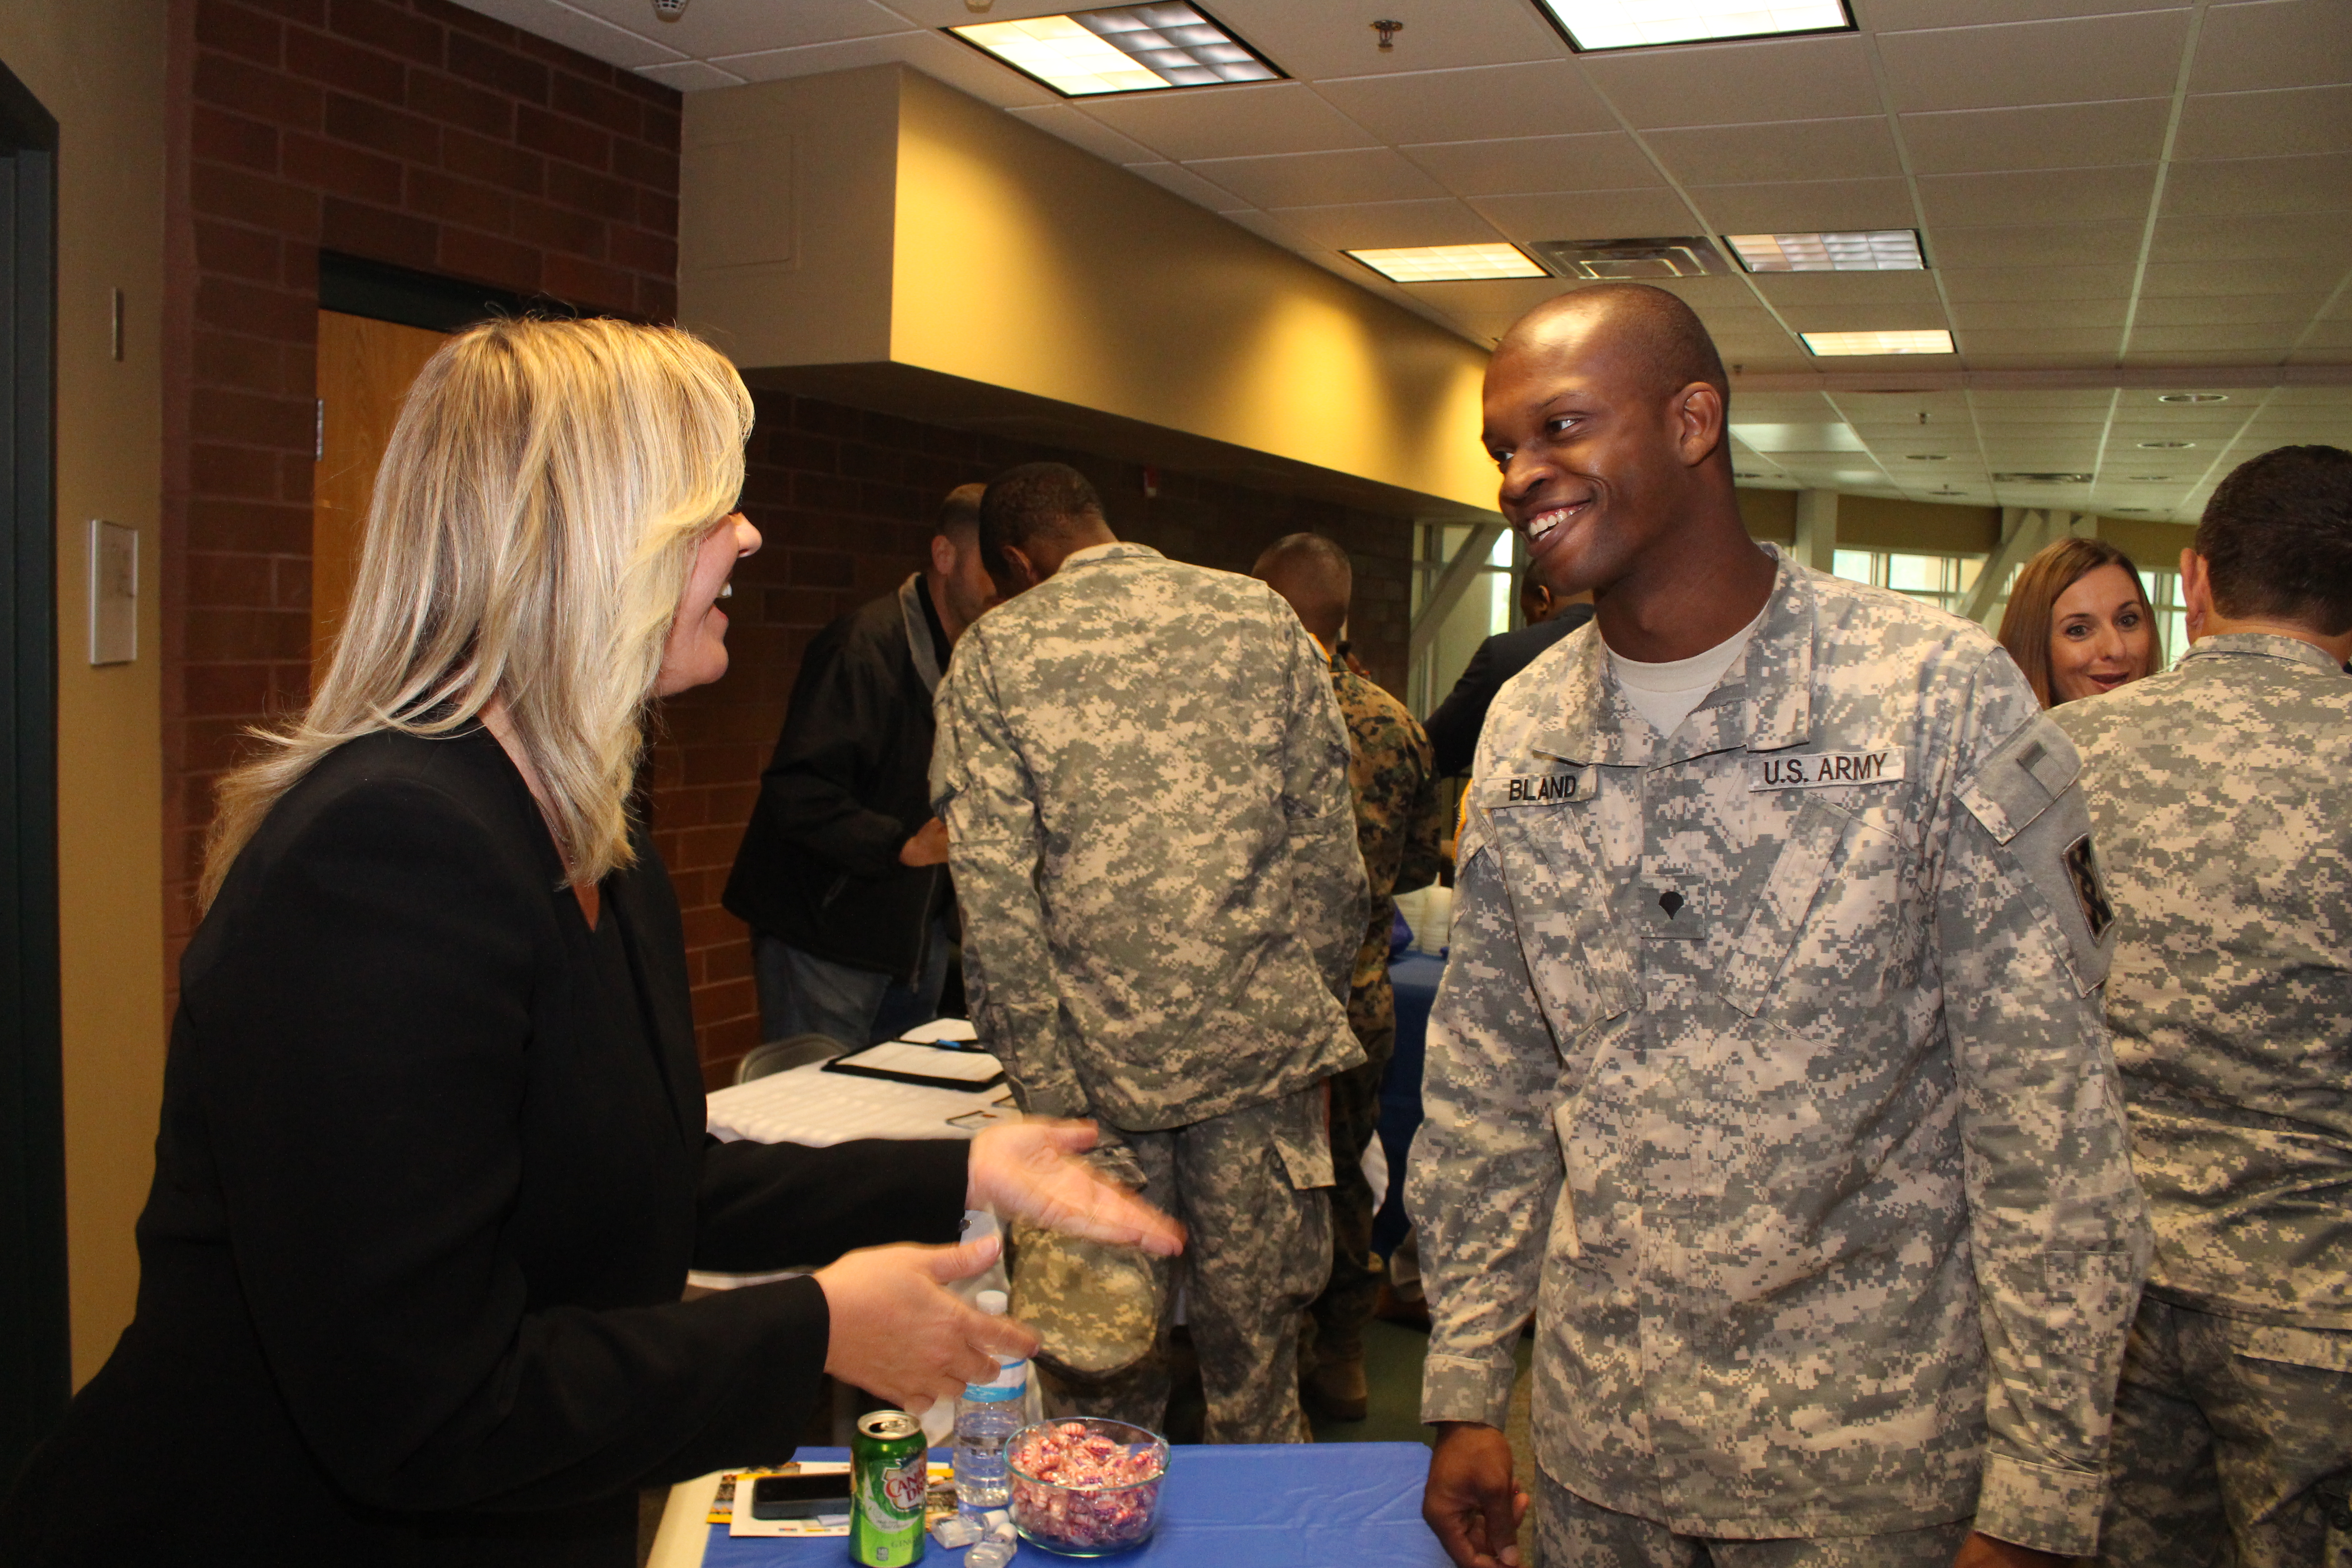 Hiring our heroes: Service members, veterans engage with civilian employers during Veteran Hiring Event